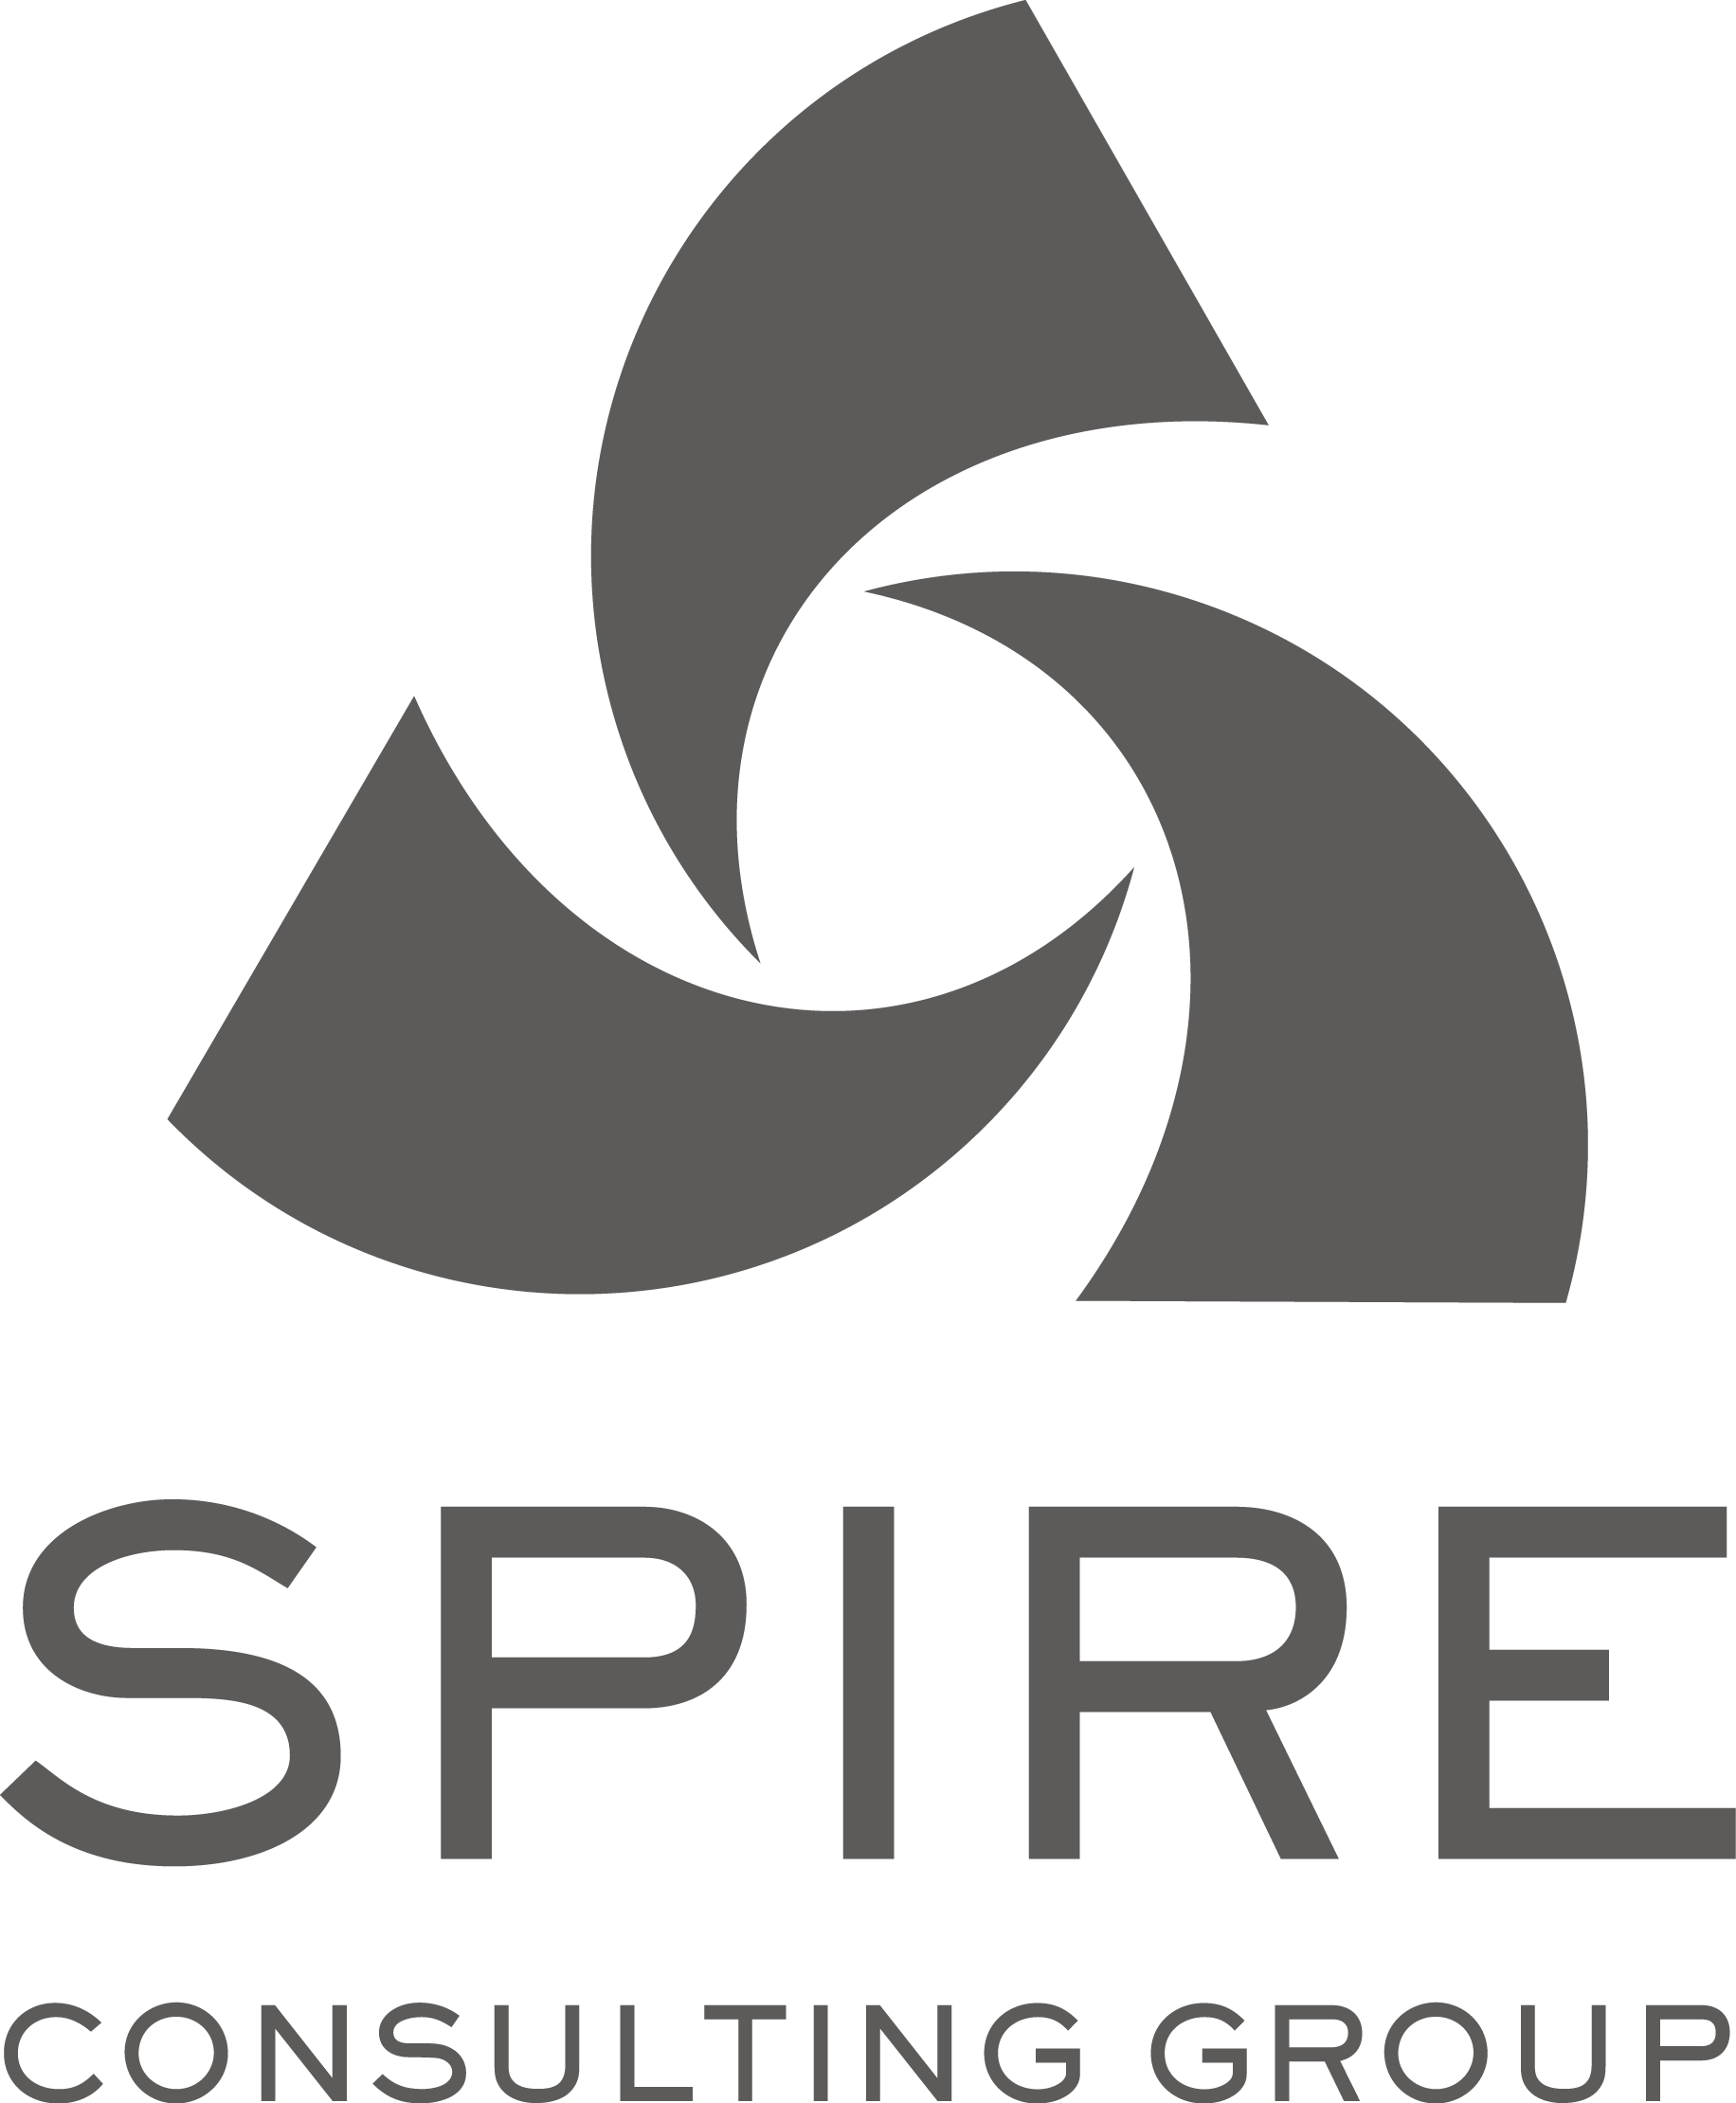 Spire Consulting Group logo gray